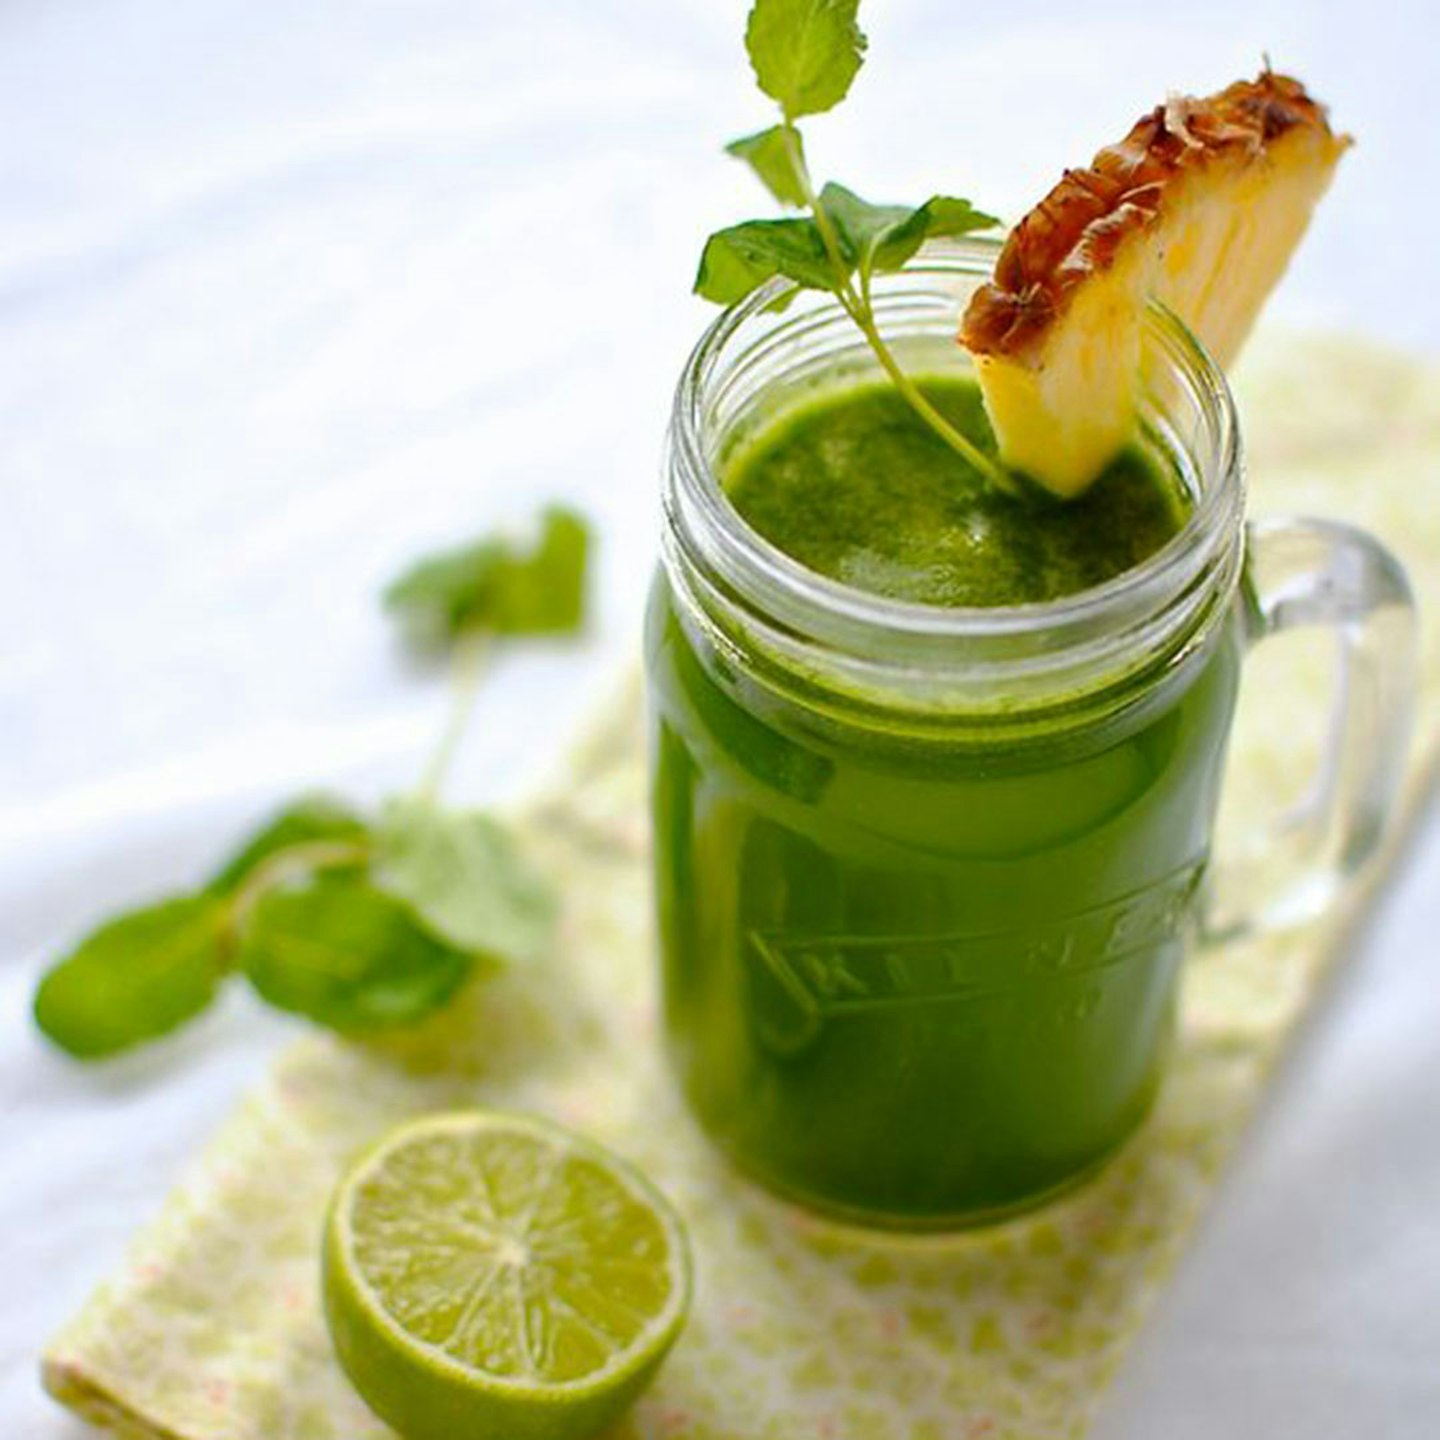 5. Pineapple Spinach and Mint